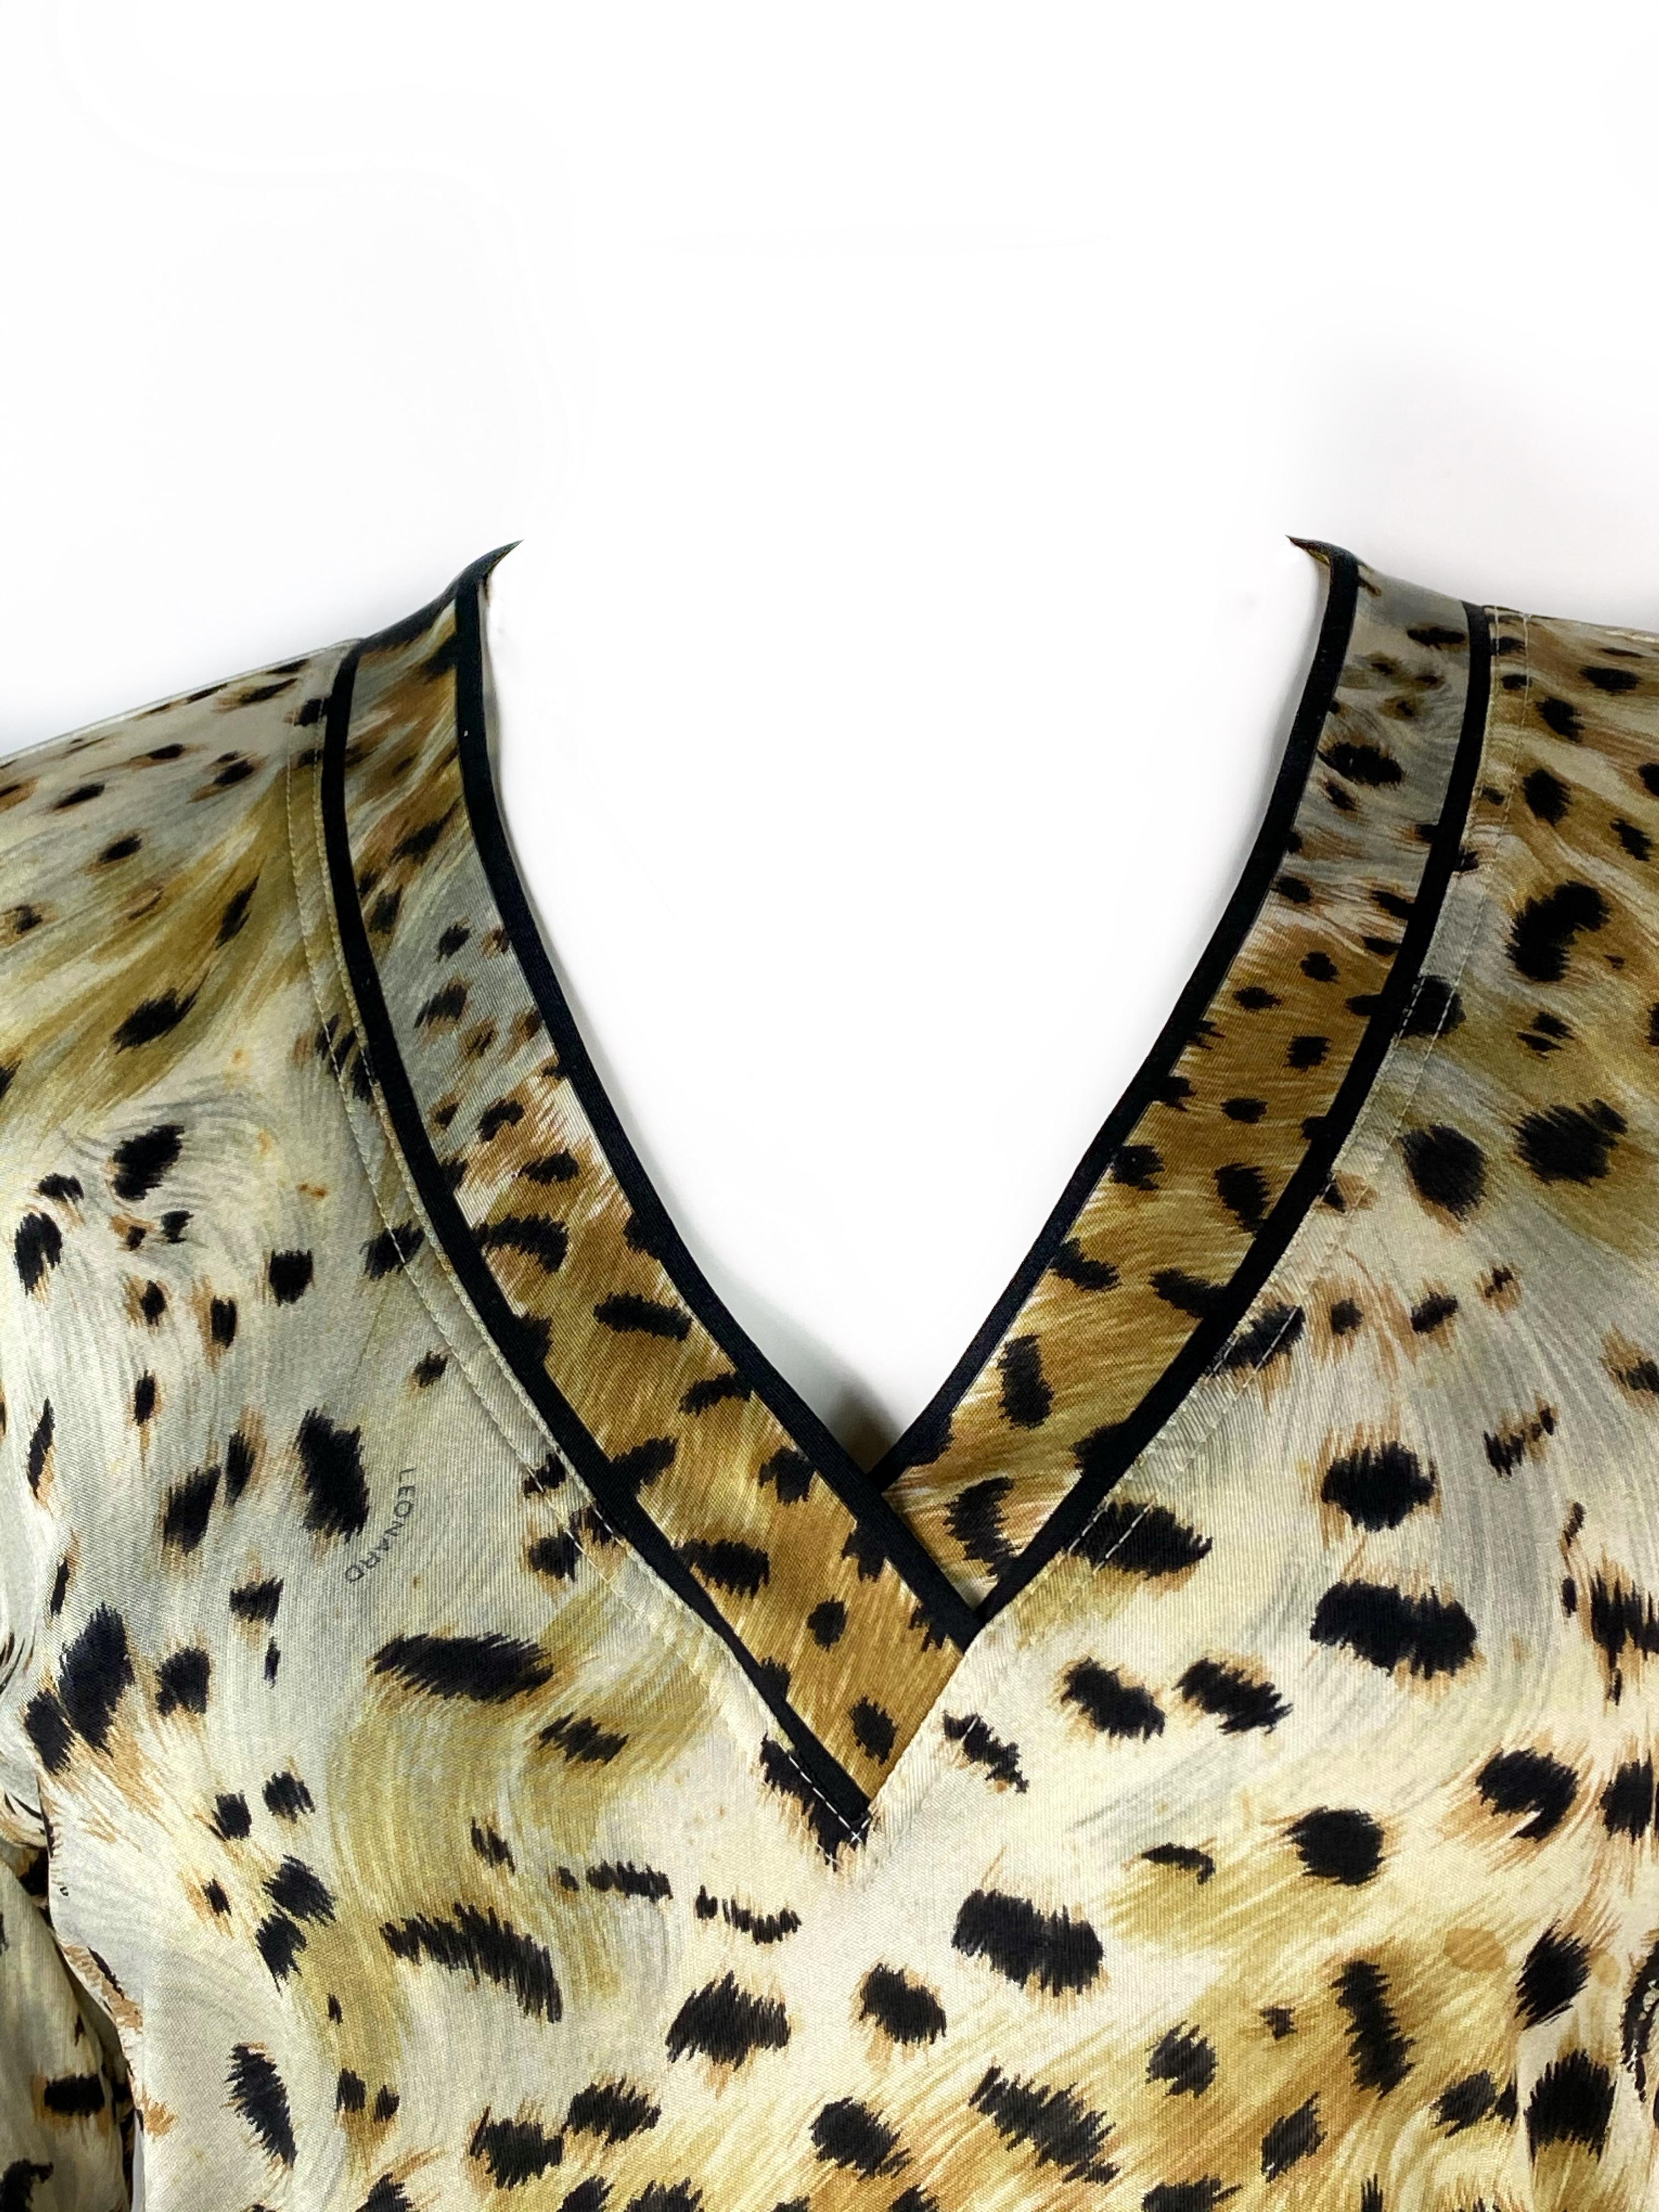 
Vintage LEONARD Paris Silk Leopard V Neck Long Sleeve Top Size 38

Product detail:
Size 38
Leopard and LEONARD print 
Long sleeve
V neck front cut out, drops 9 inches long 
Made in Italy
